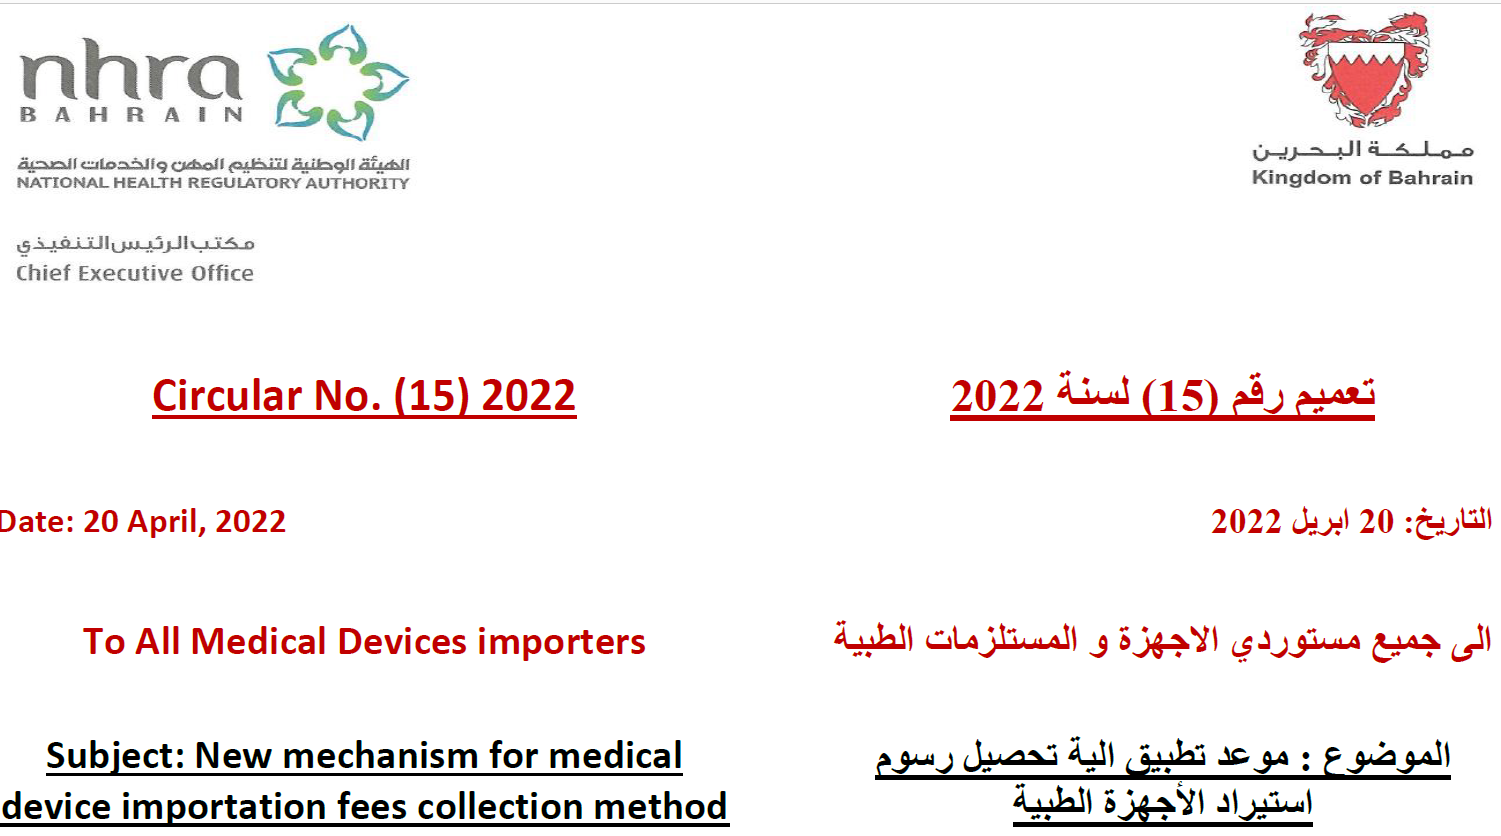 Circular No. (15) 2022: To All Medical Devices Importers - New Procedure for Medical Device Importation Fees Collection Method